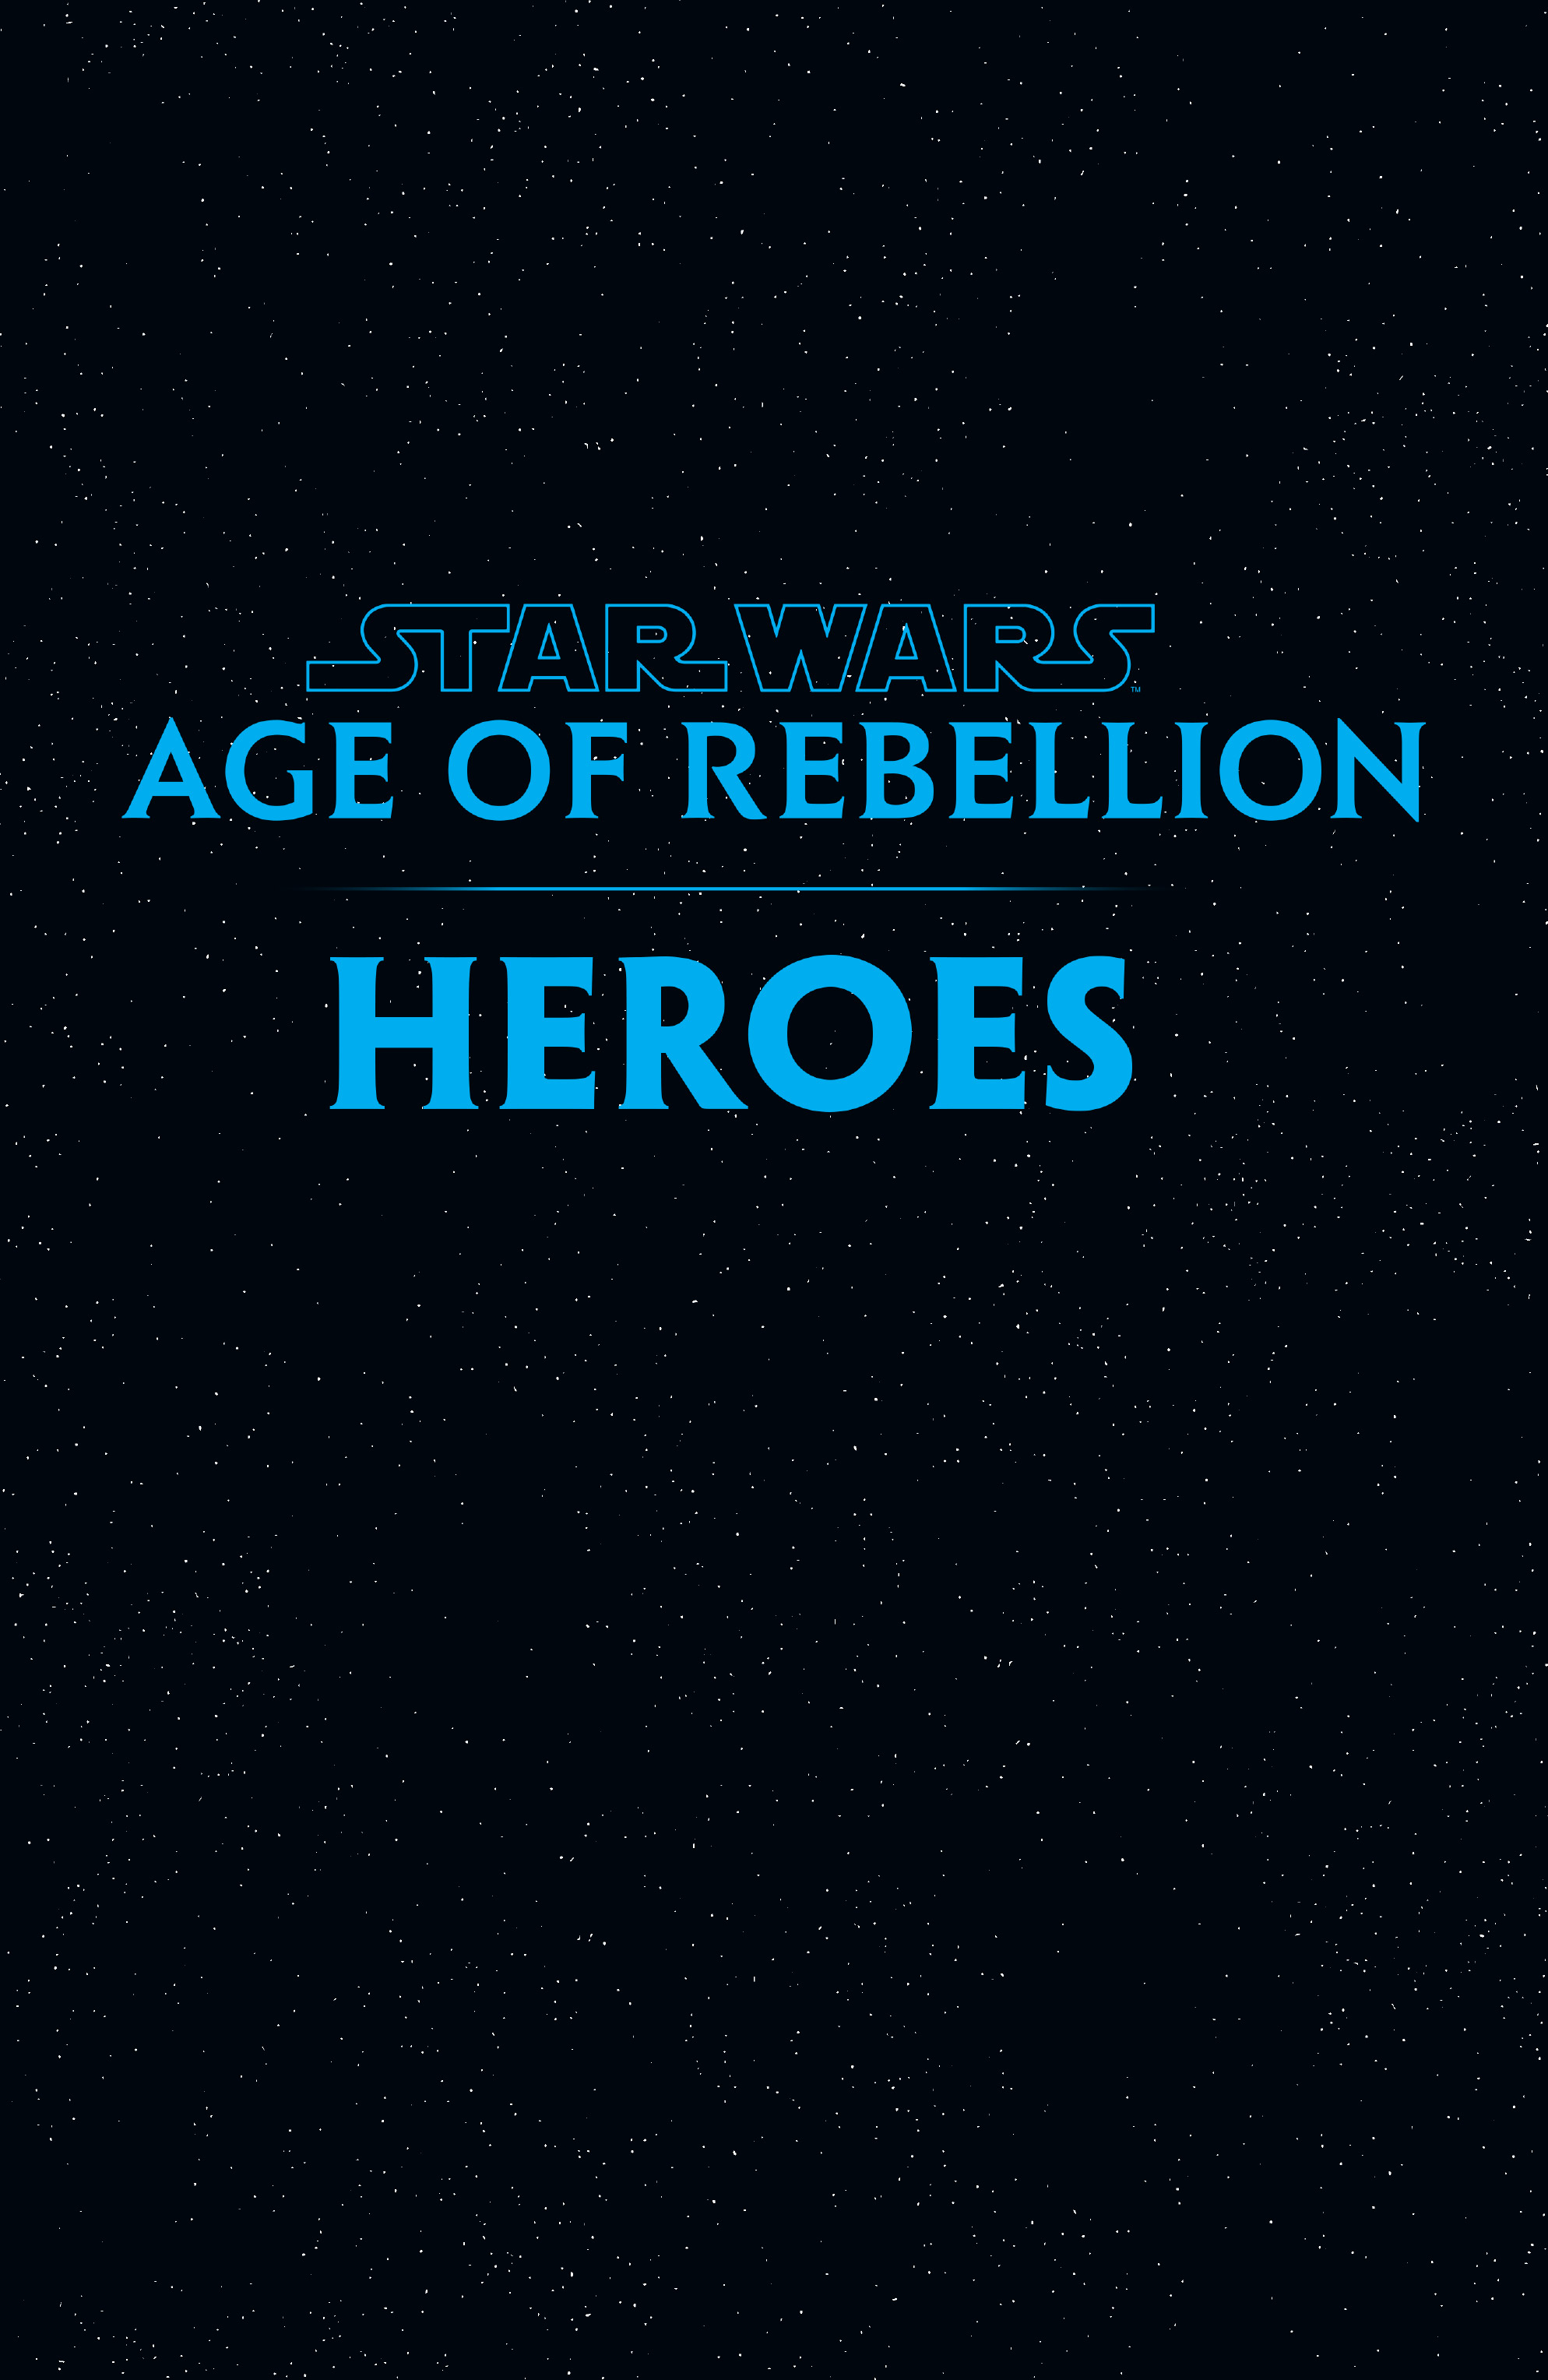 Read online Star Wars: Age of Rebellion - Heroes comic -  Issue # TPB - 2